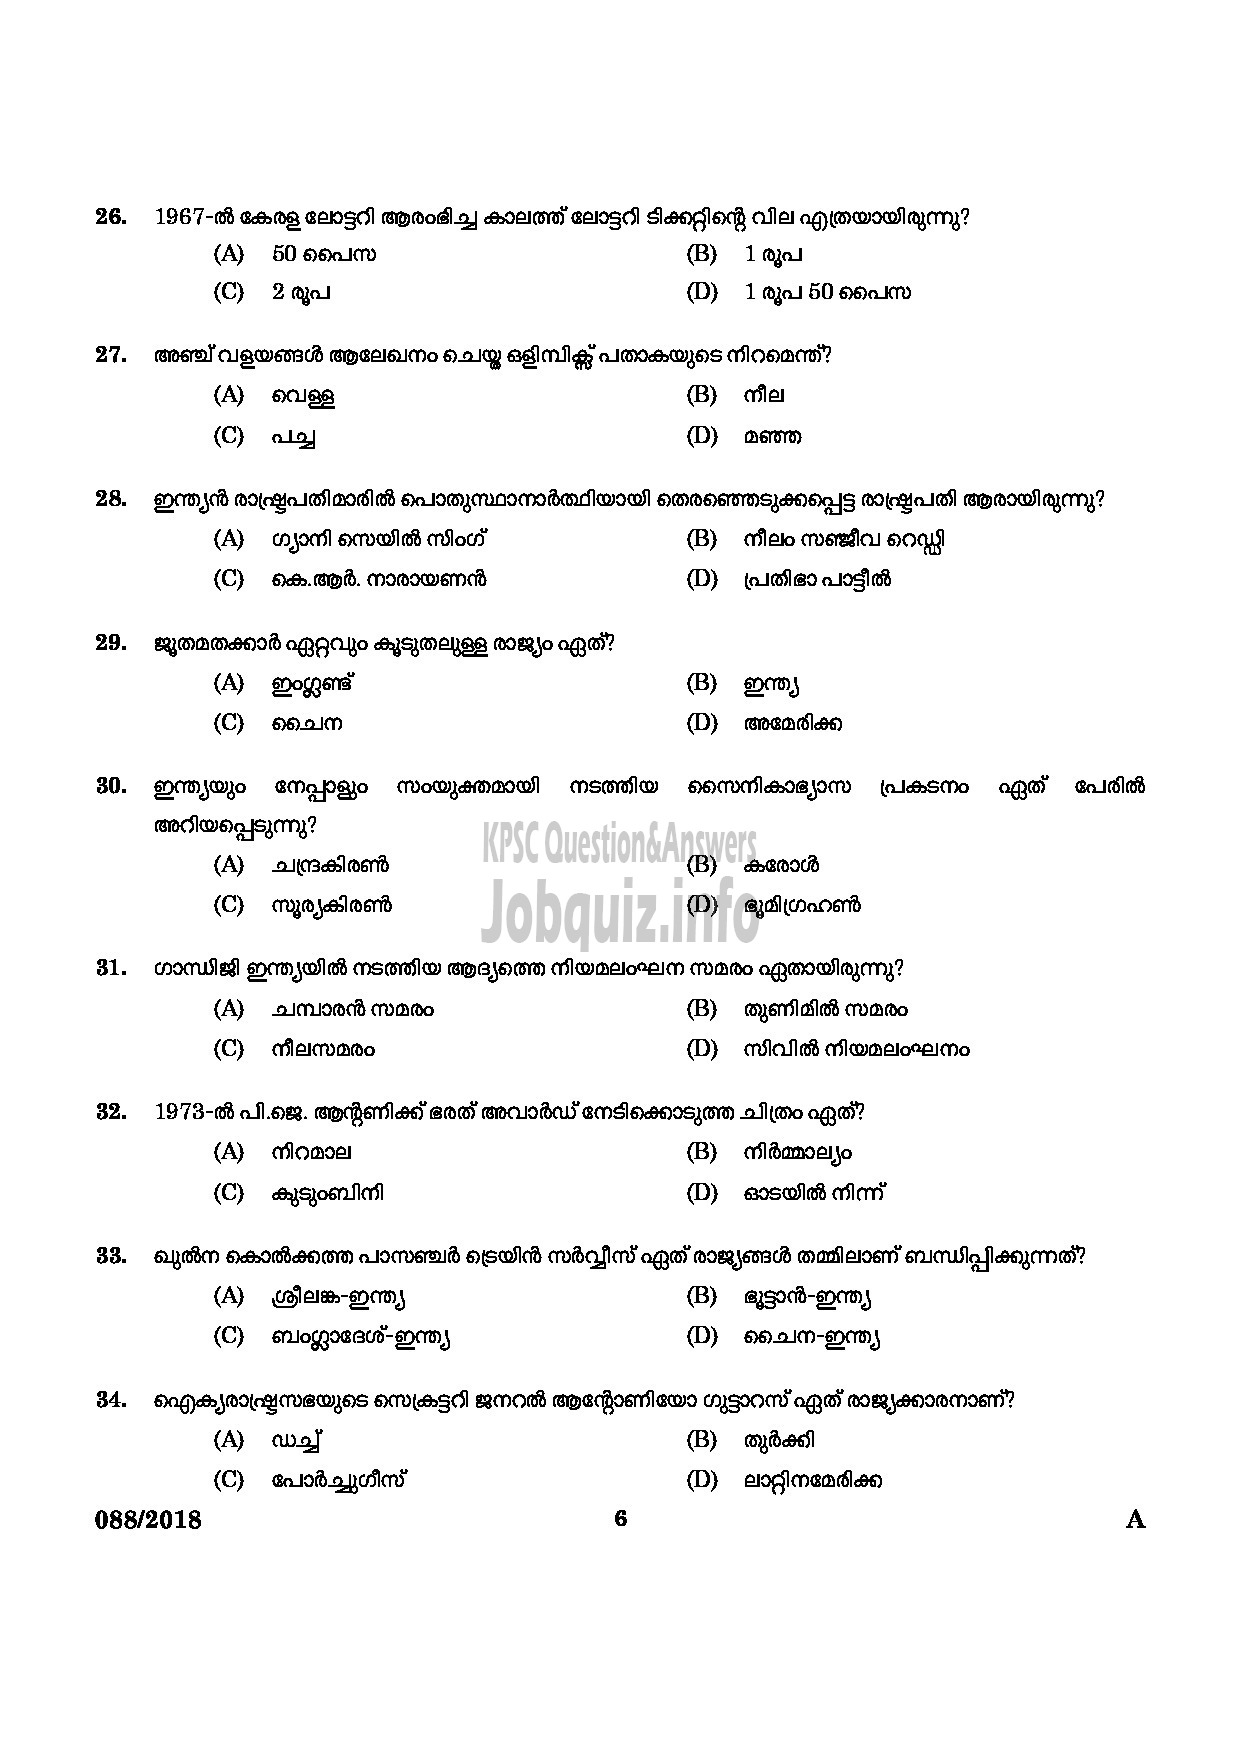 Kerala PSC Question Paper - REPORTER GR II MALAYALAM HEAD CONSTABLE GENERAL EXECUTIVE FORCE POLICE Malayalam-4